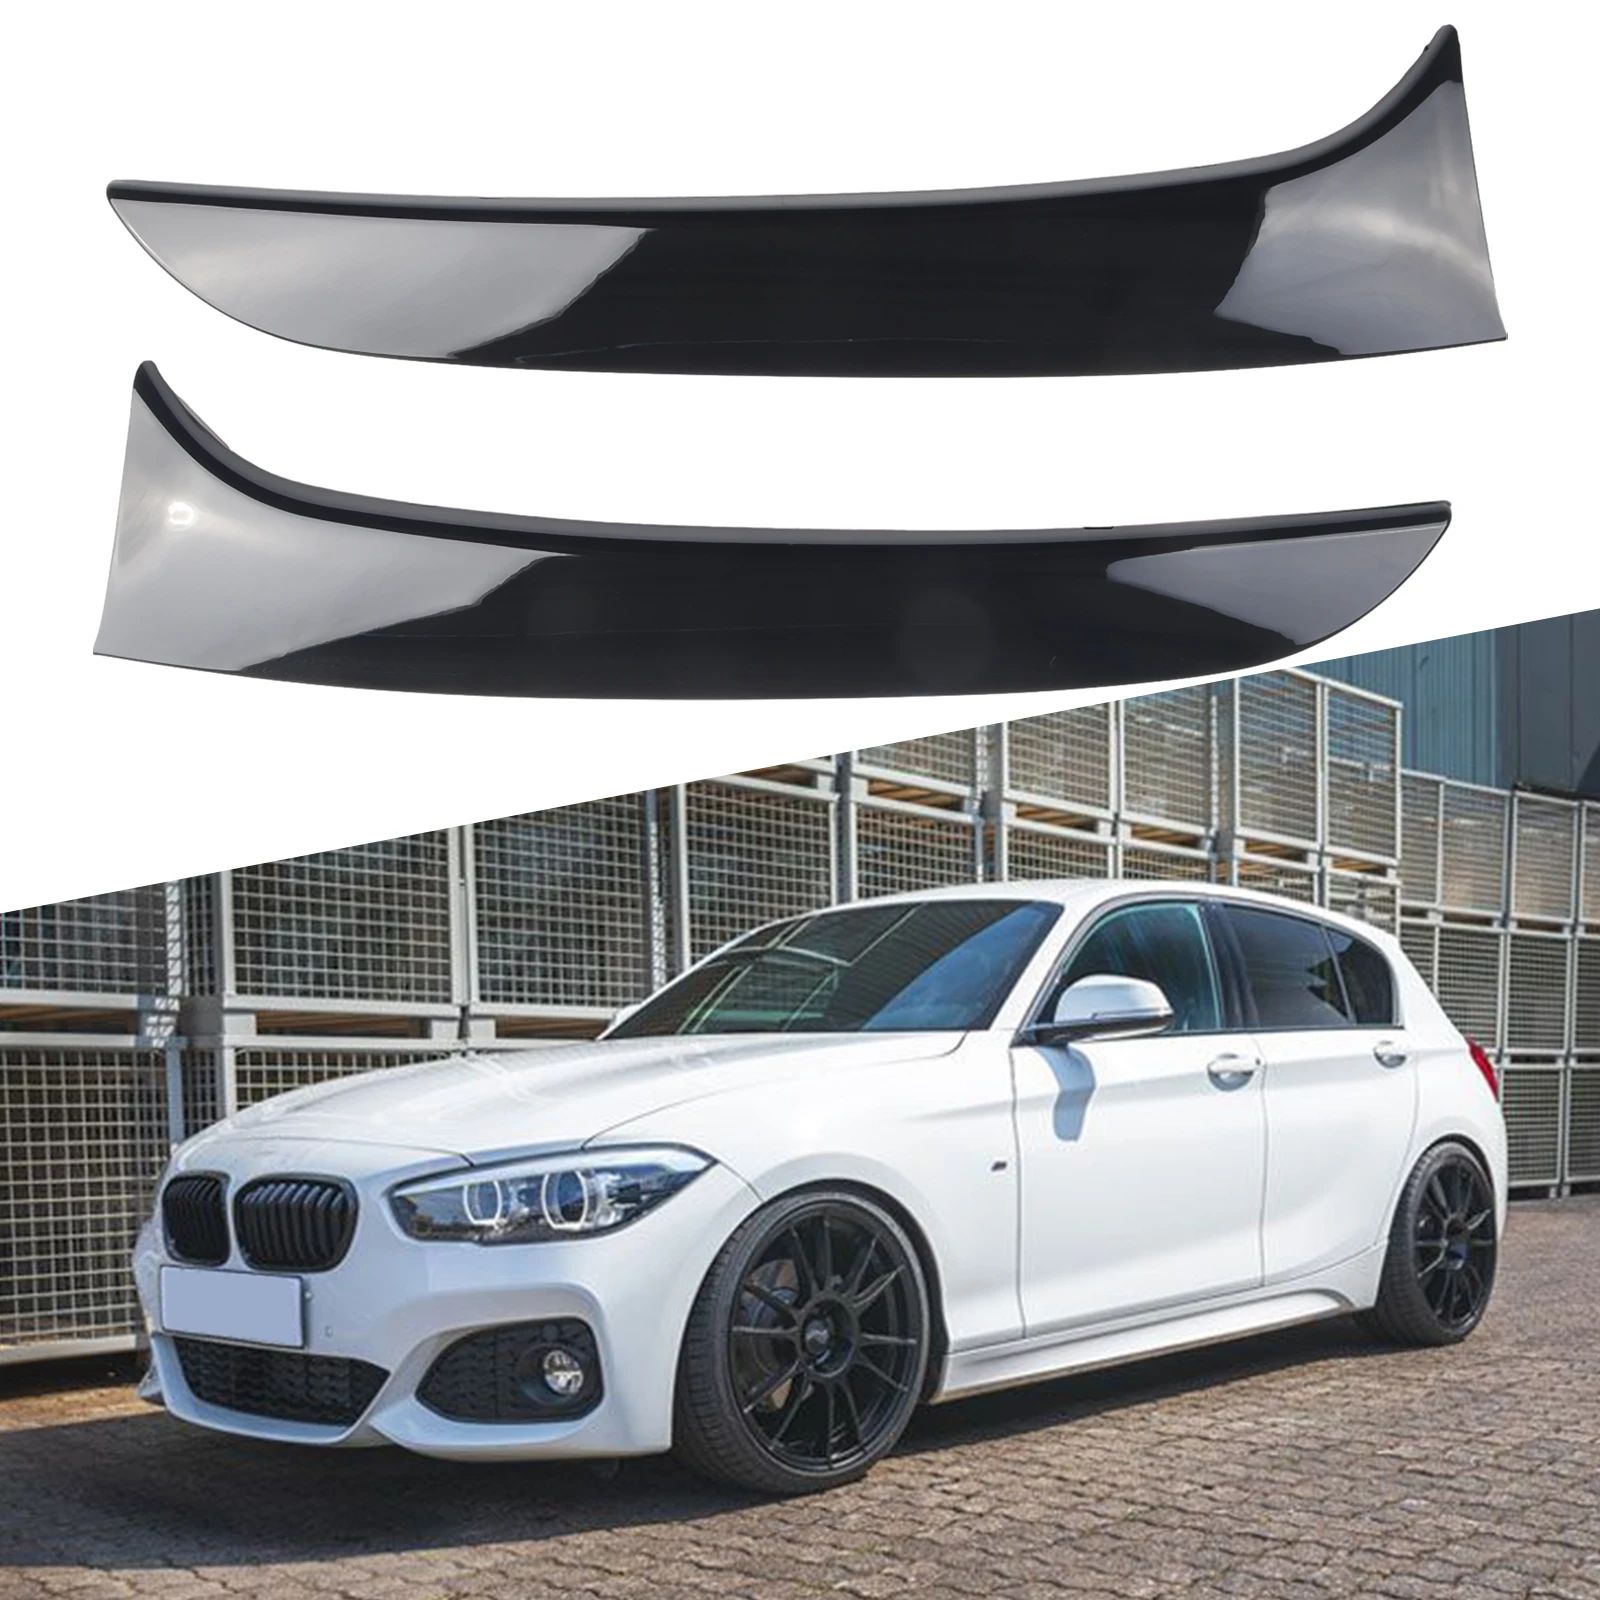 

Protect and Beautify Car Rear Door Glass Spoiler for BMW 1 Series F20 F21 Hatchback 2012 2019, Easy Installation Guaranteed